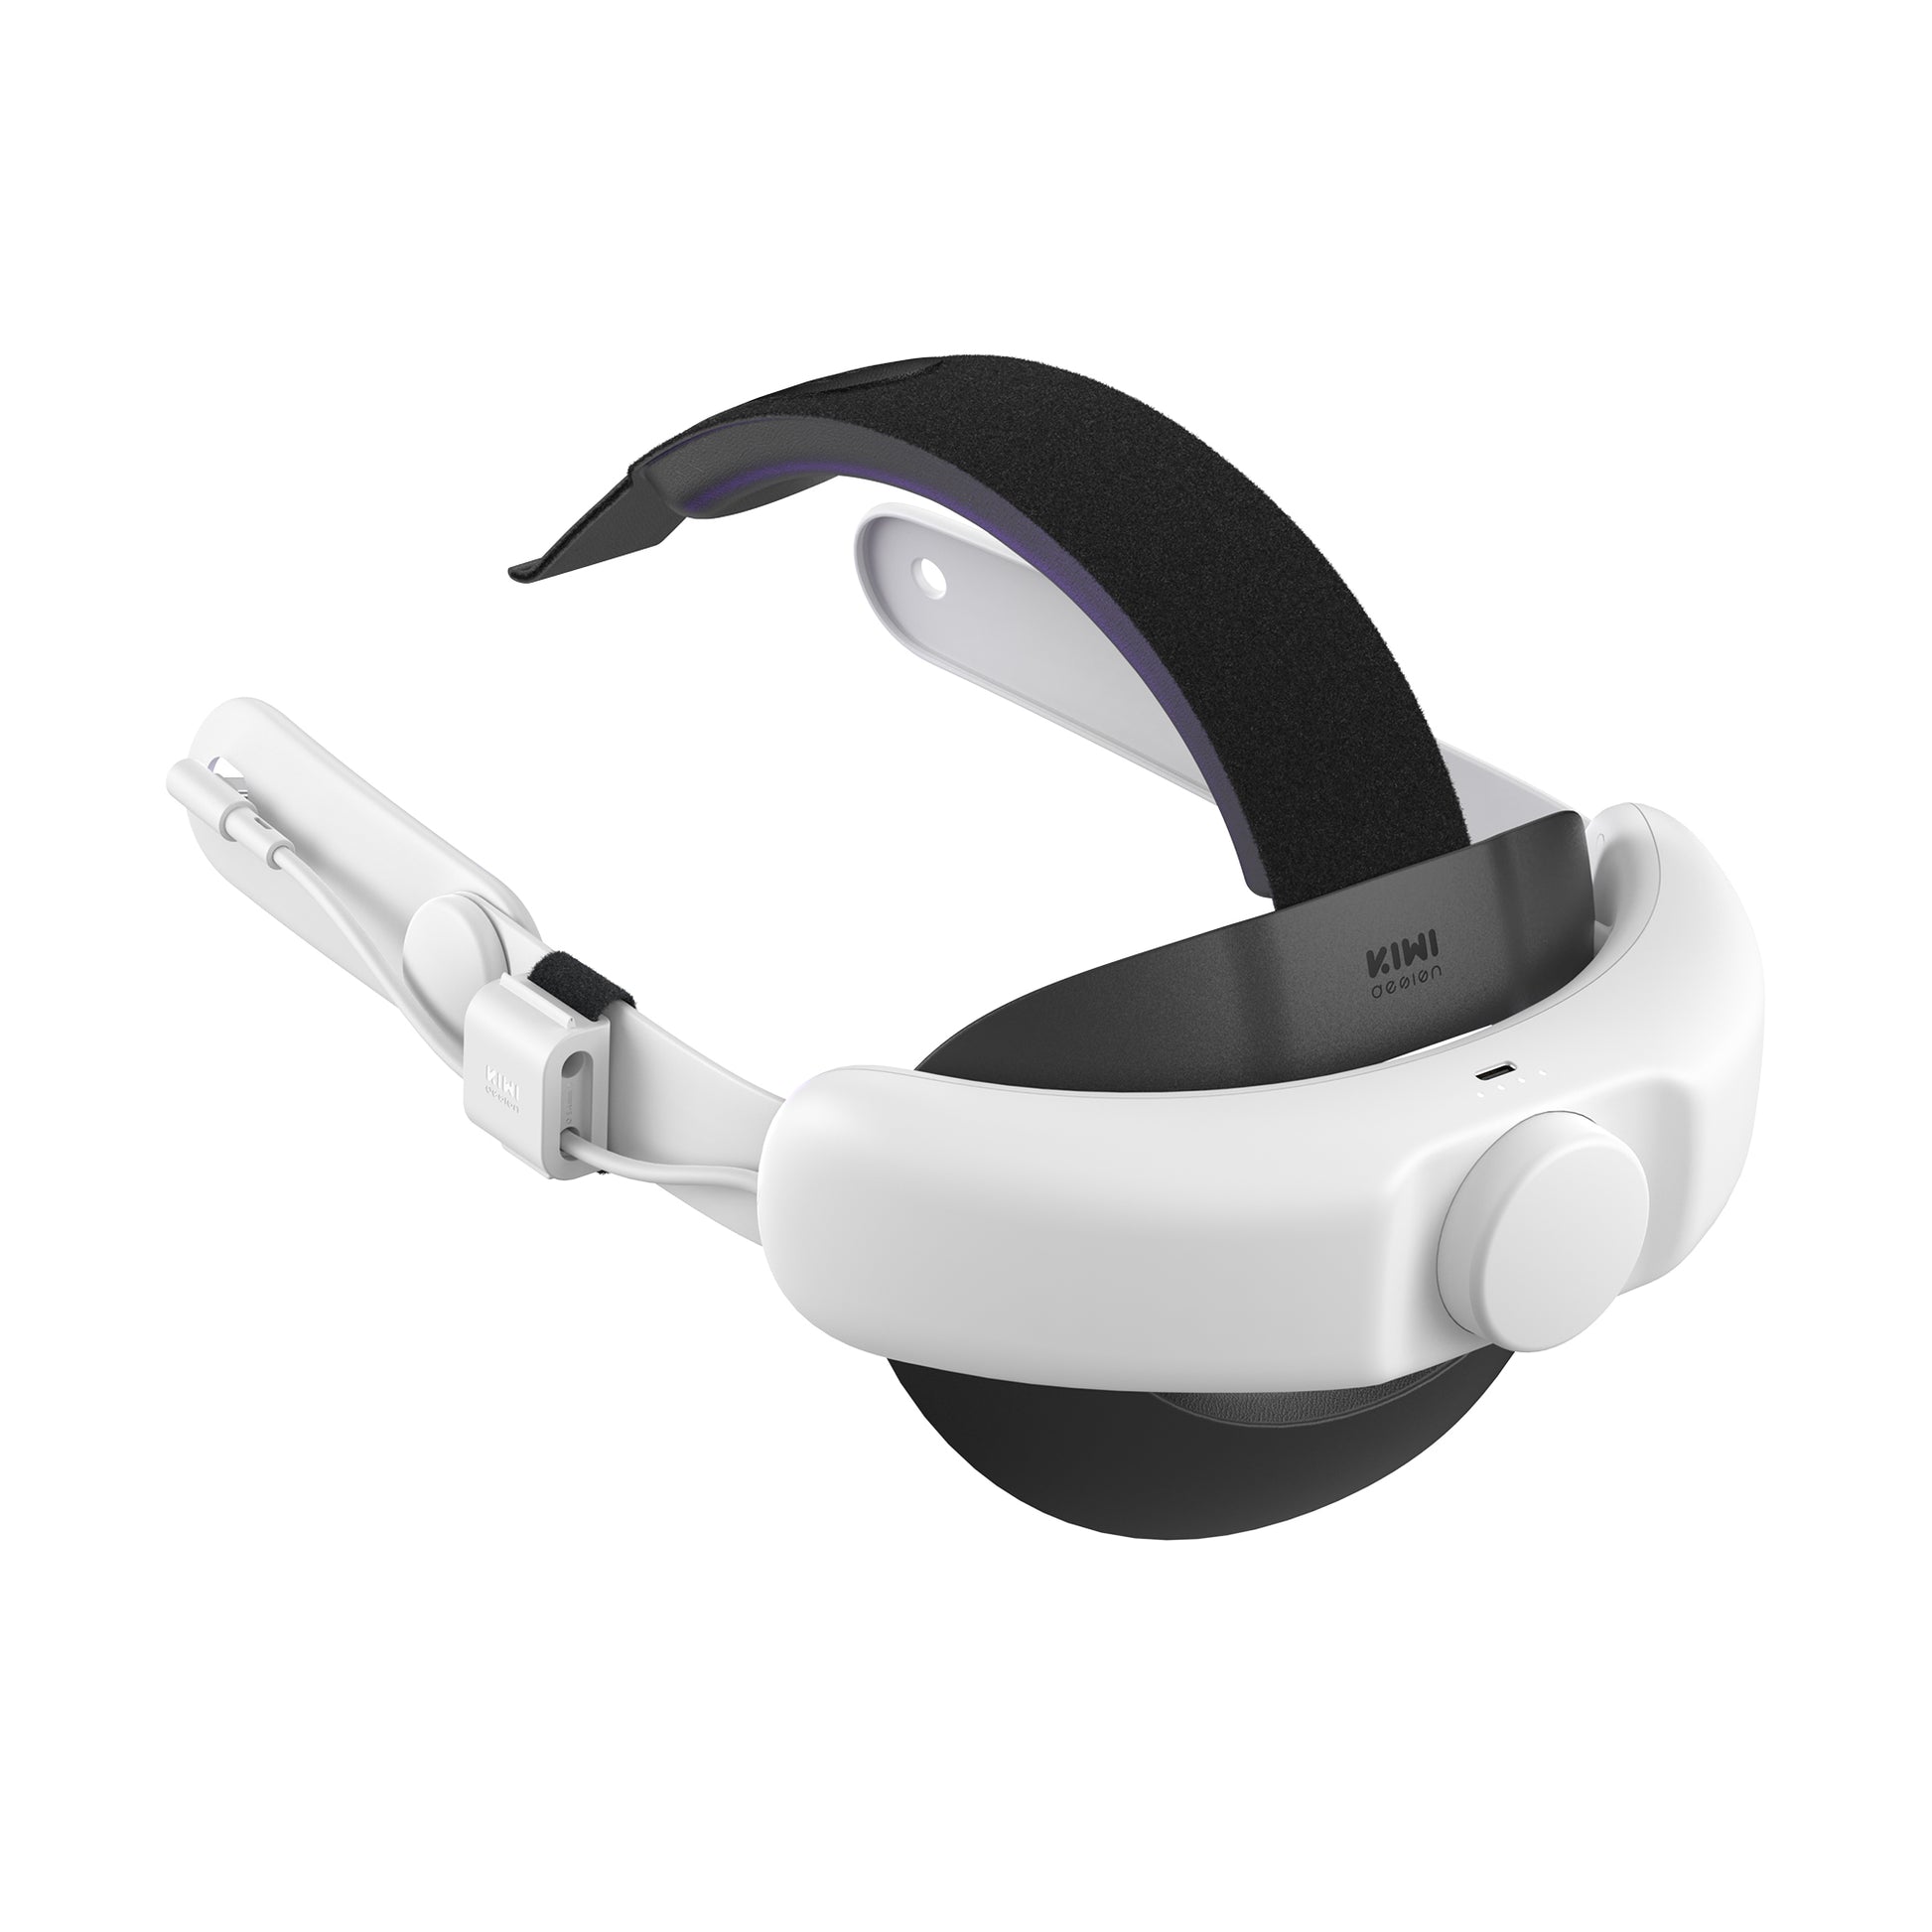 AUBIKA Head Strap with Battery Compatible with Oculus Quest 2